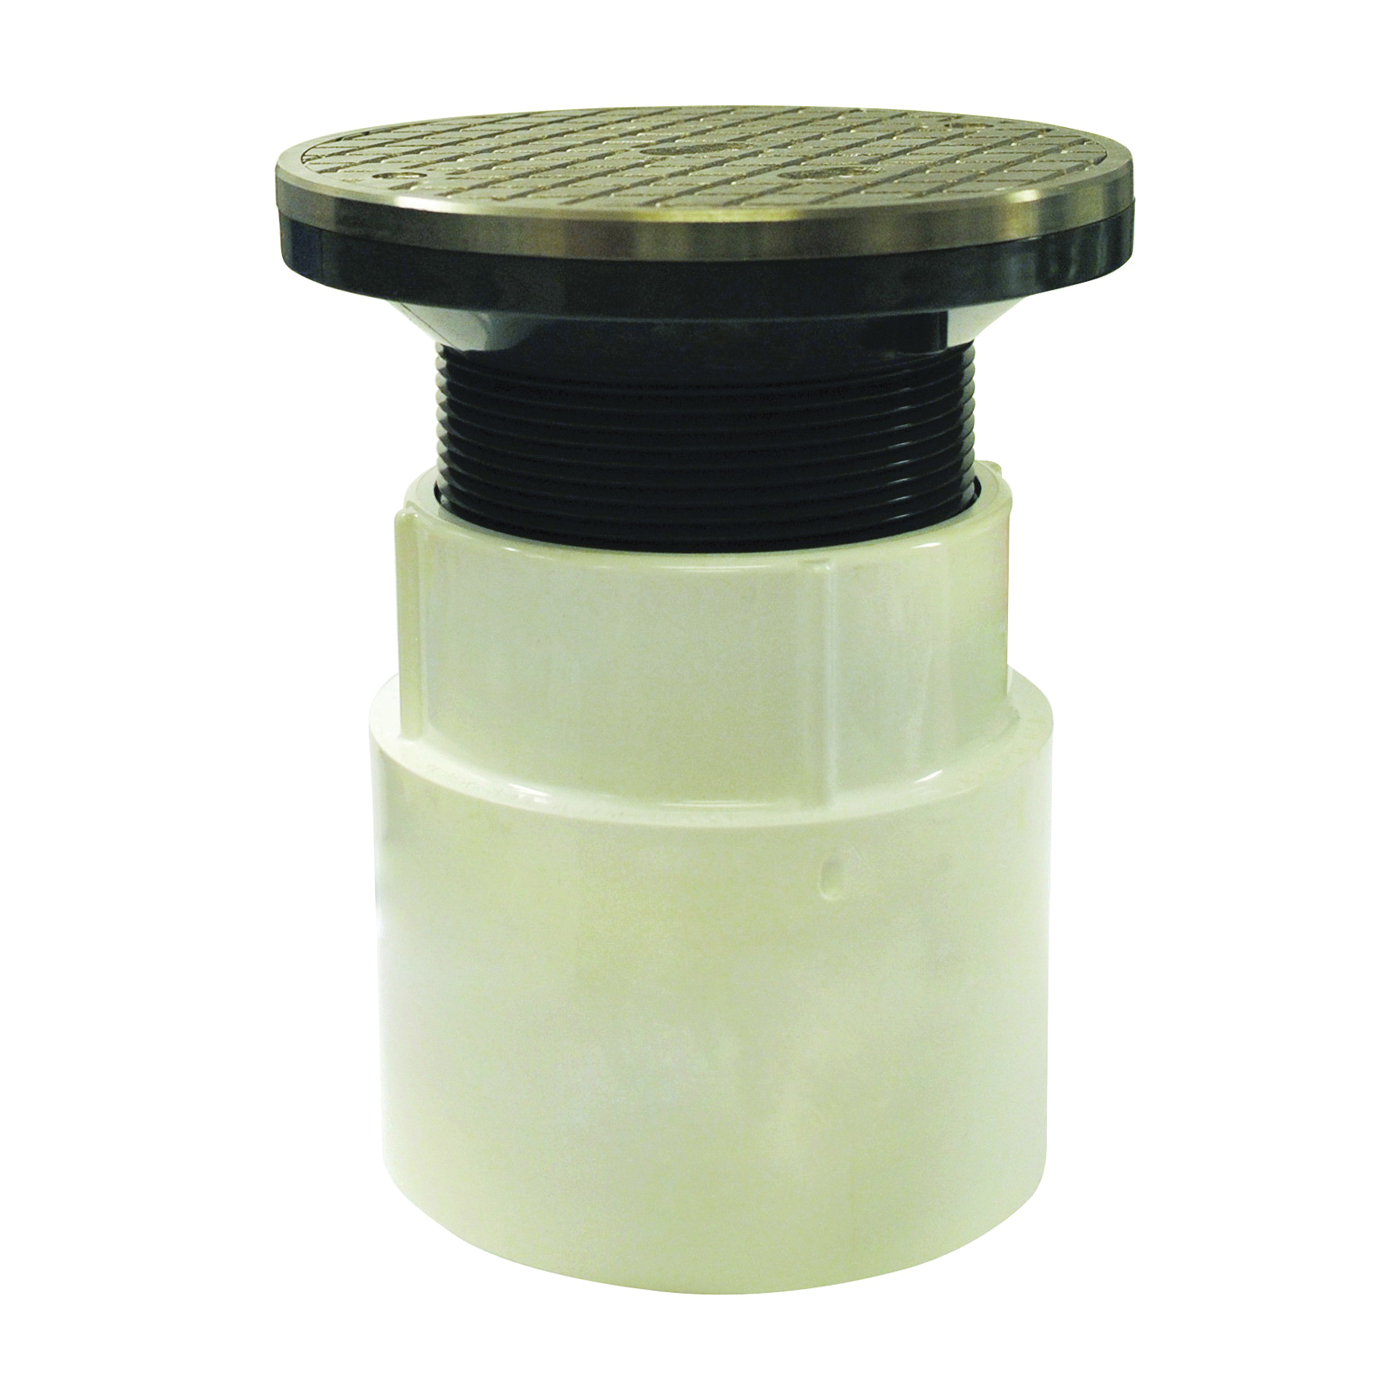 74168 Cleanout Adapter, 4 in, PVC